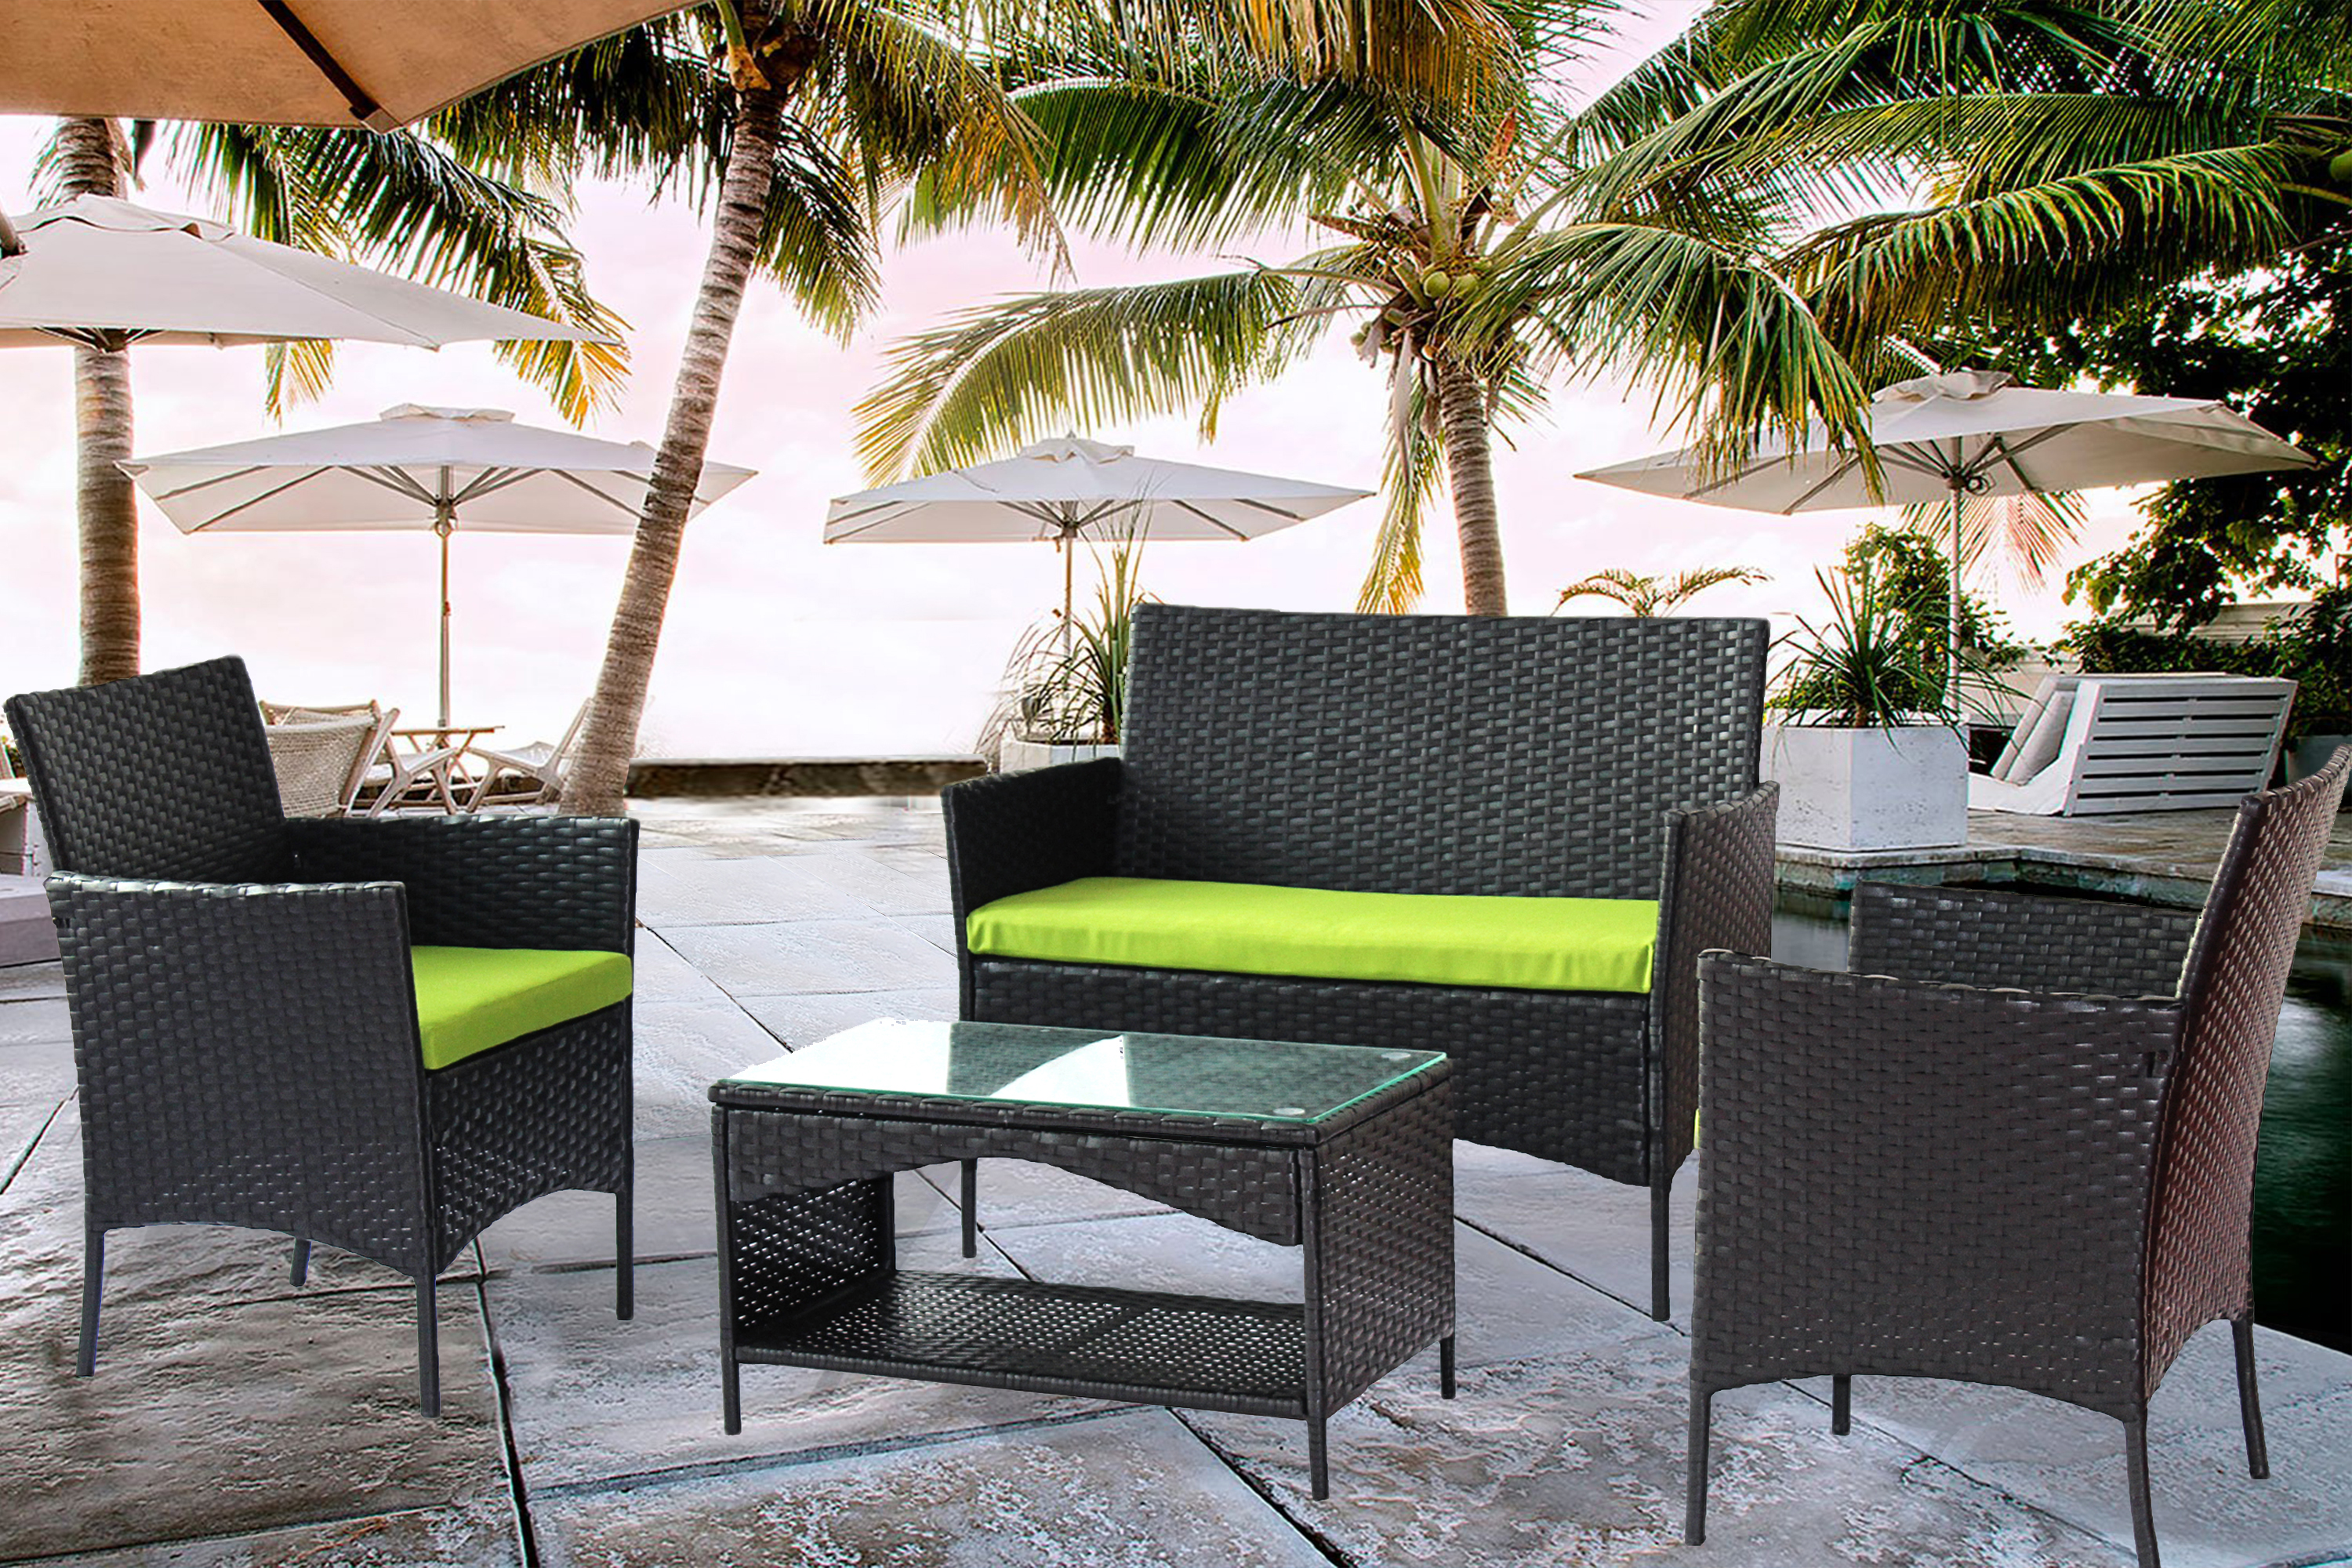 Outdoor Patio Set, iRerts Modern 4 Pieces Front Porch Furniture Sets, Rattan Wicker Patio Furniture Set with Green Cushion, Table, Patio Conversation Sets for Backyard Garden Poolside, Black, R2389 - image 1 of 8